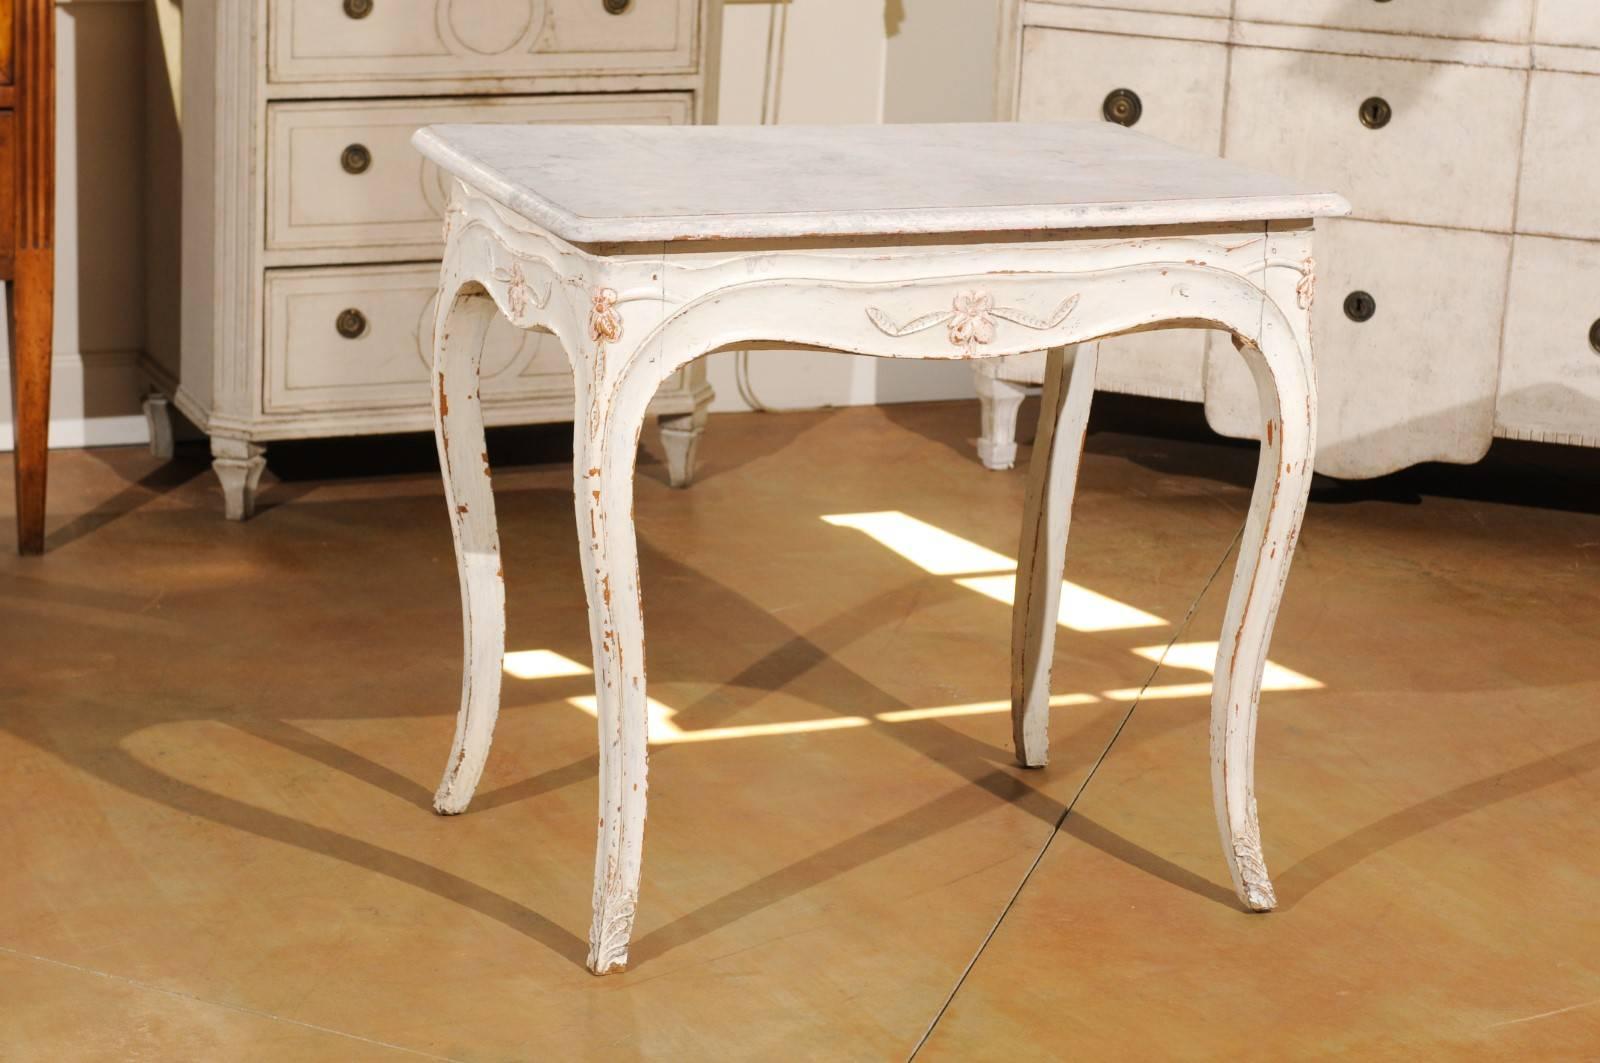 A Swedish painted freestanding side table from the late 19th century with carved apron and cabriole legs. This Swedish side table features a rectangular top with bevelled edges, sitting above an apron beautifully carved on all sides. This valanced